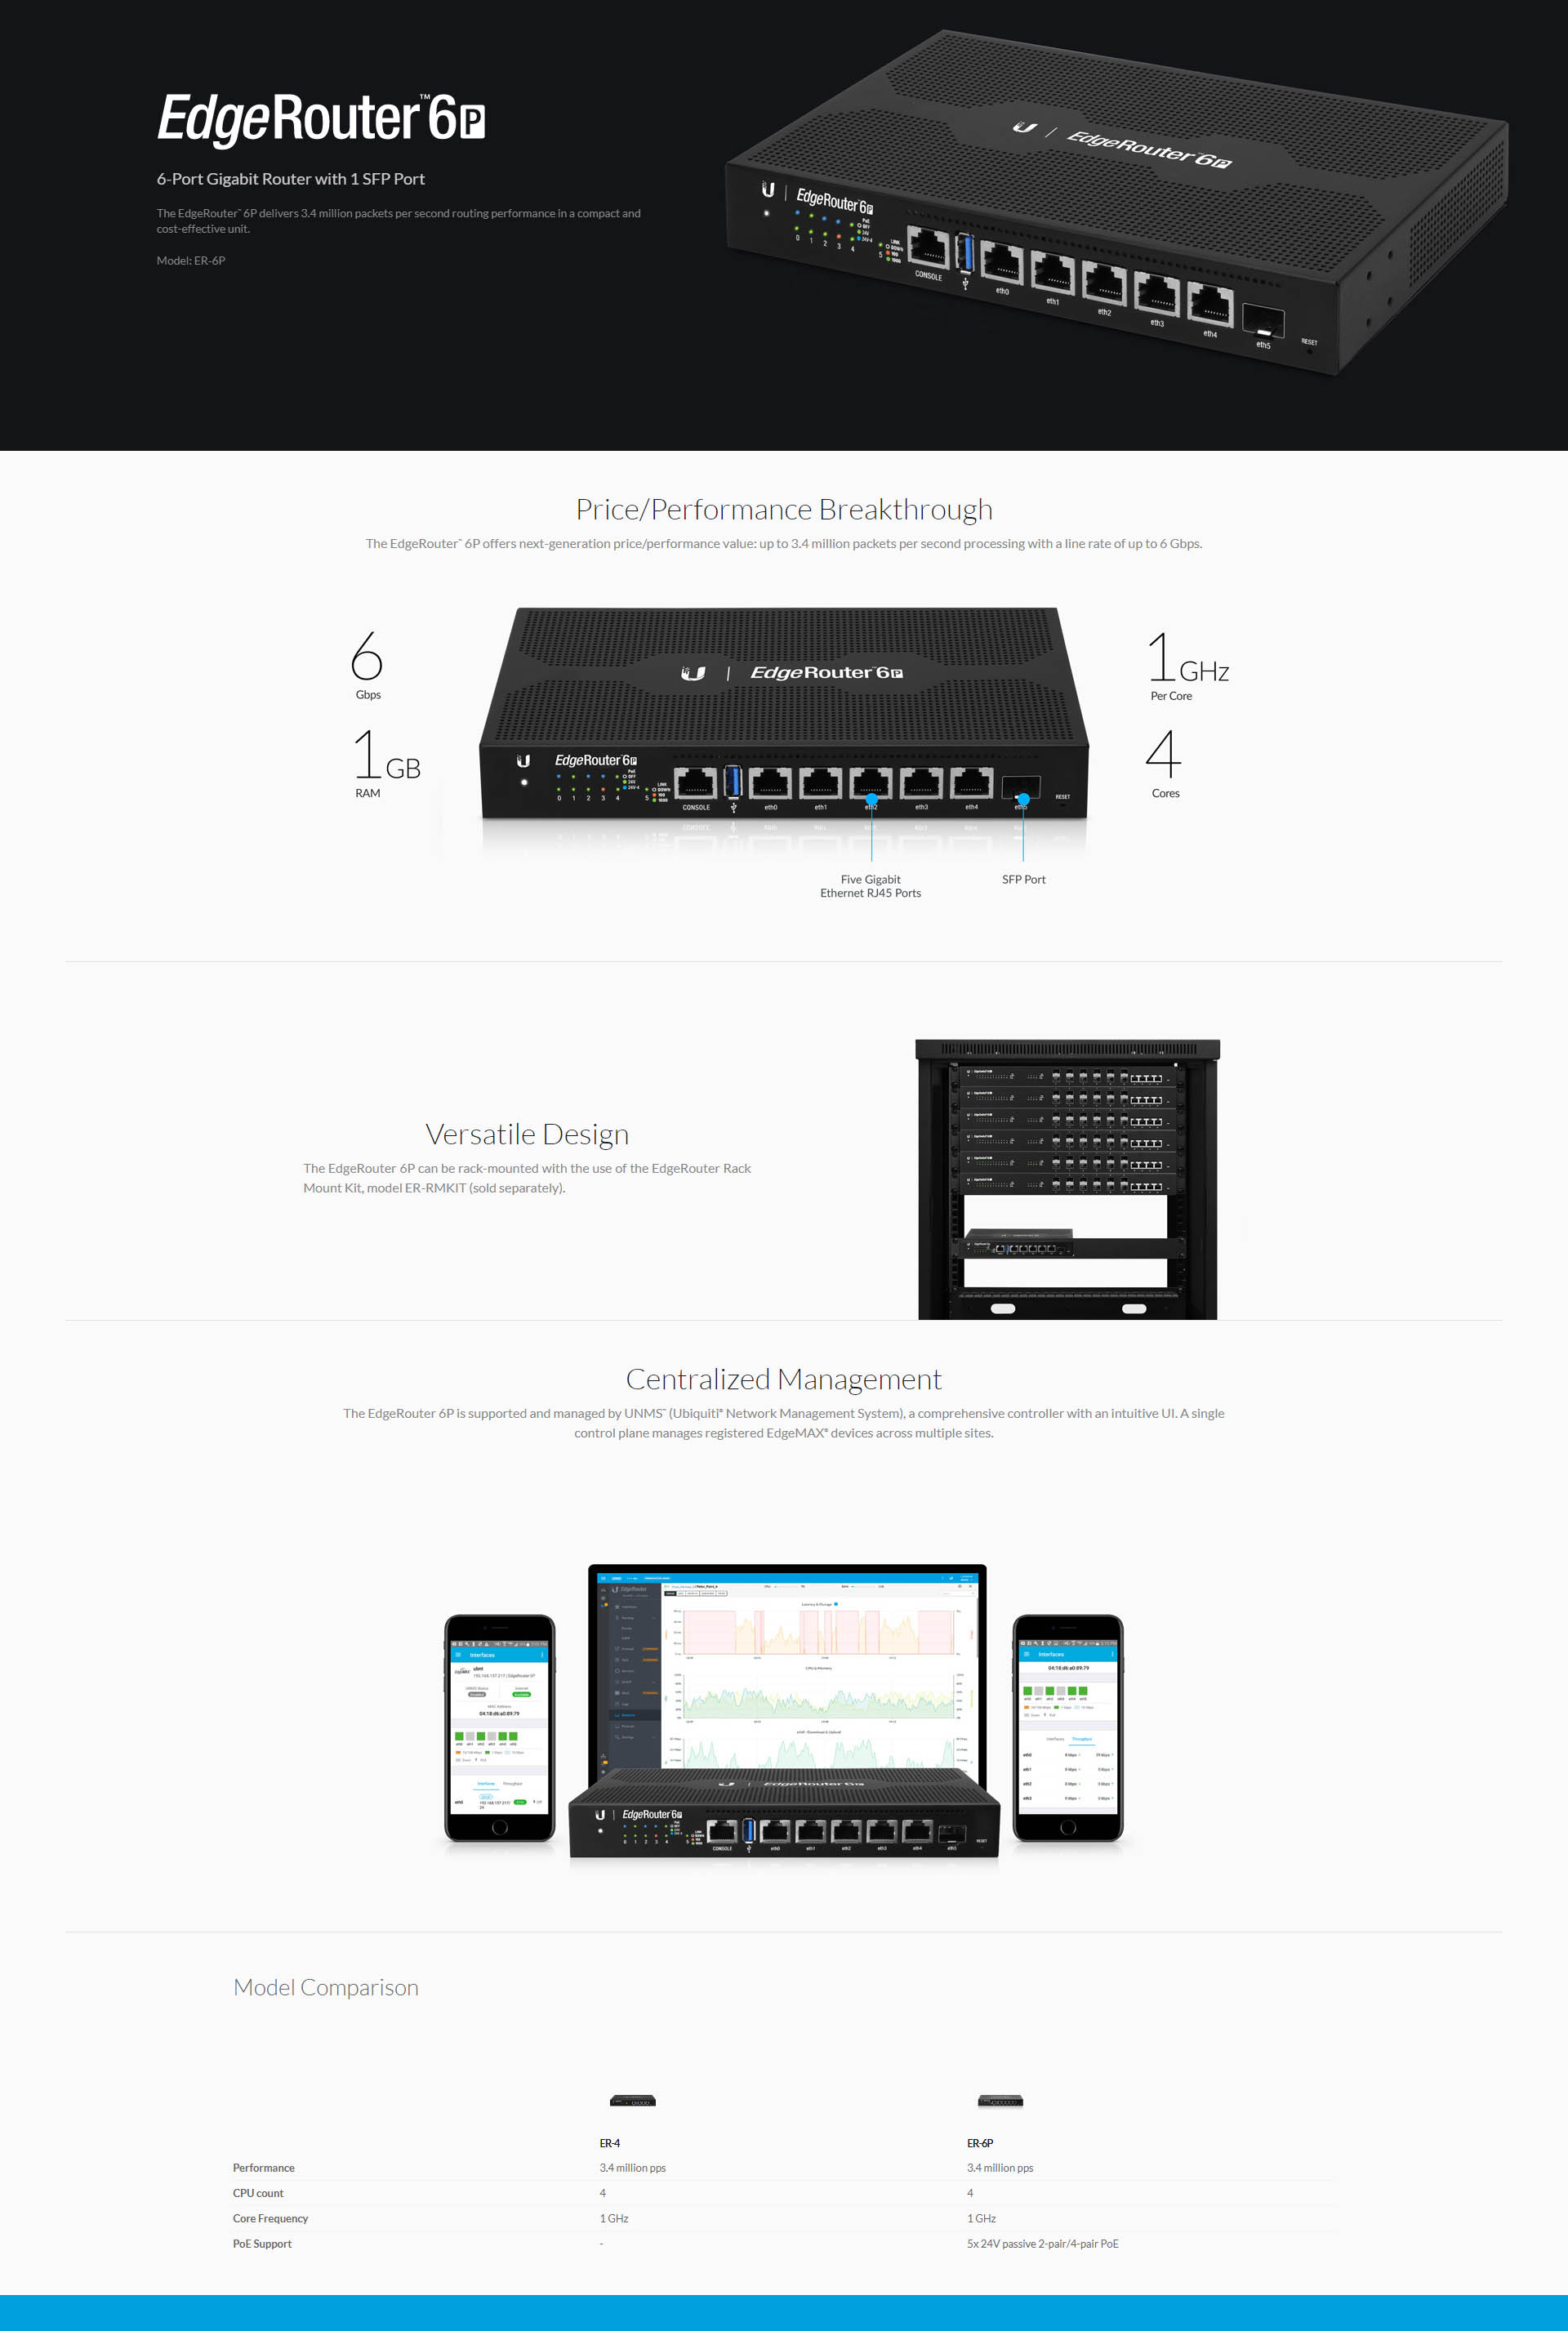 A large marketing image providing additional information about the product Ubiquiti EdgeRouter 6 Port with PoE - Additional alt info not provided